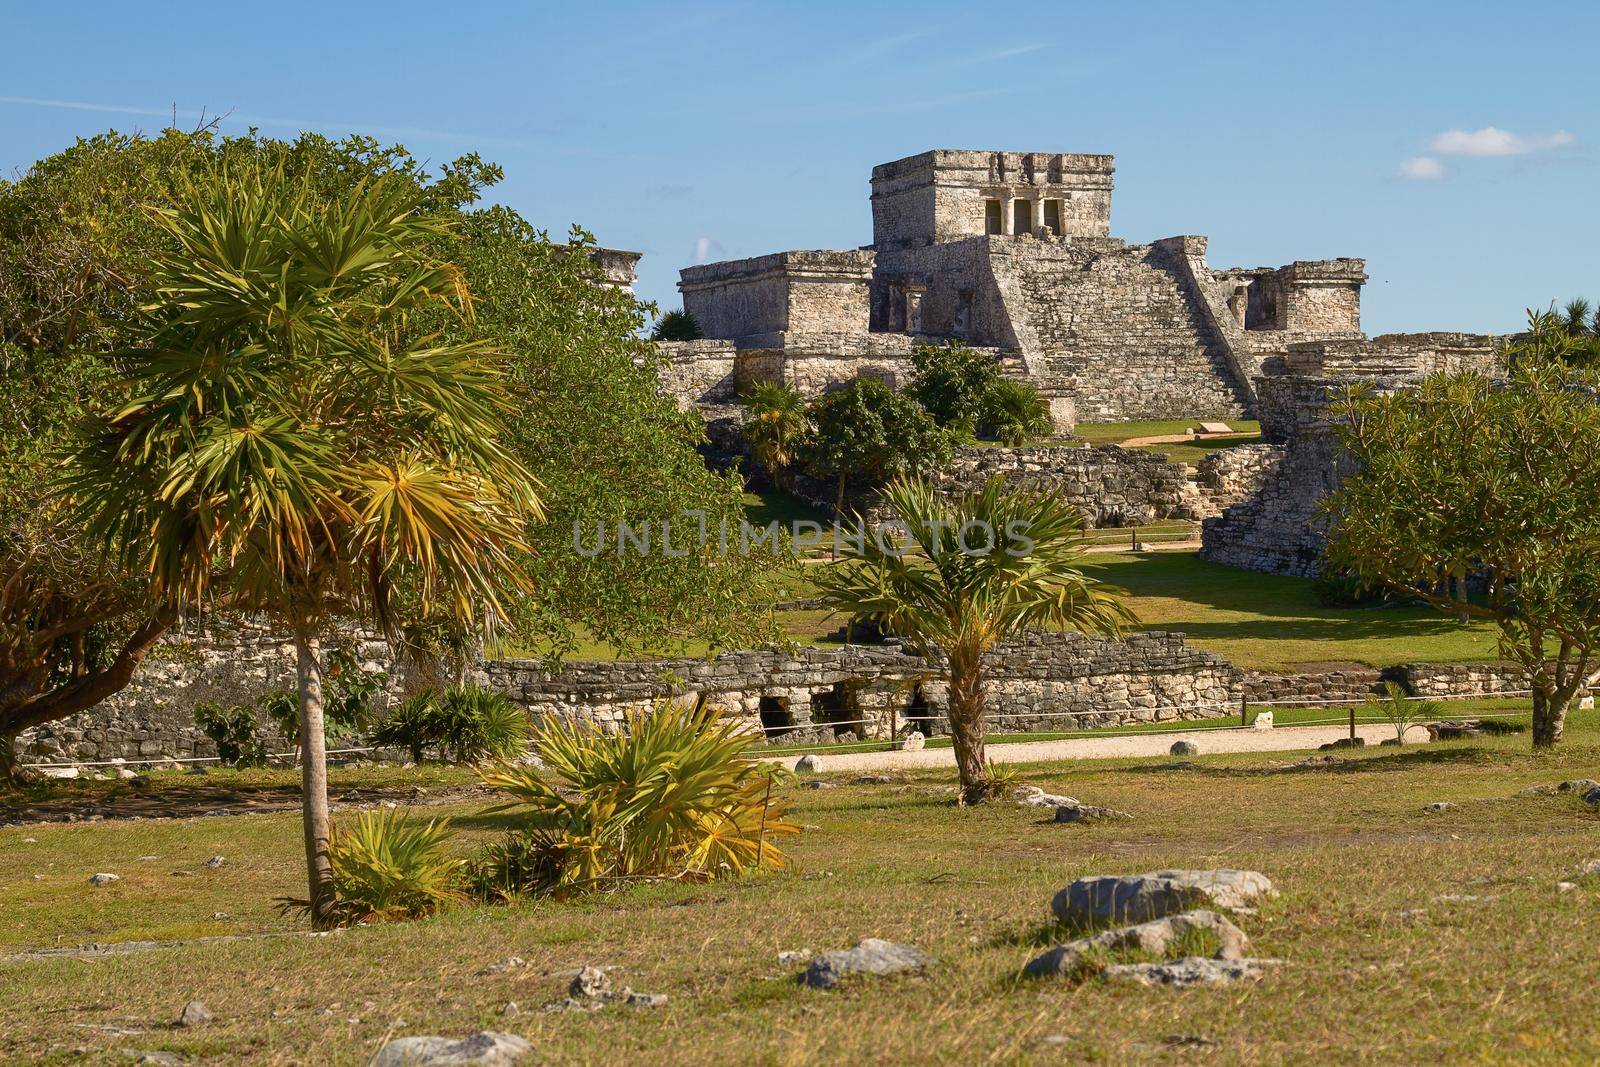 Mayan Ruins of Temple in Tulum Mexico by wondry